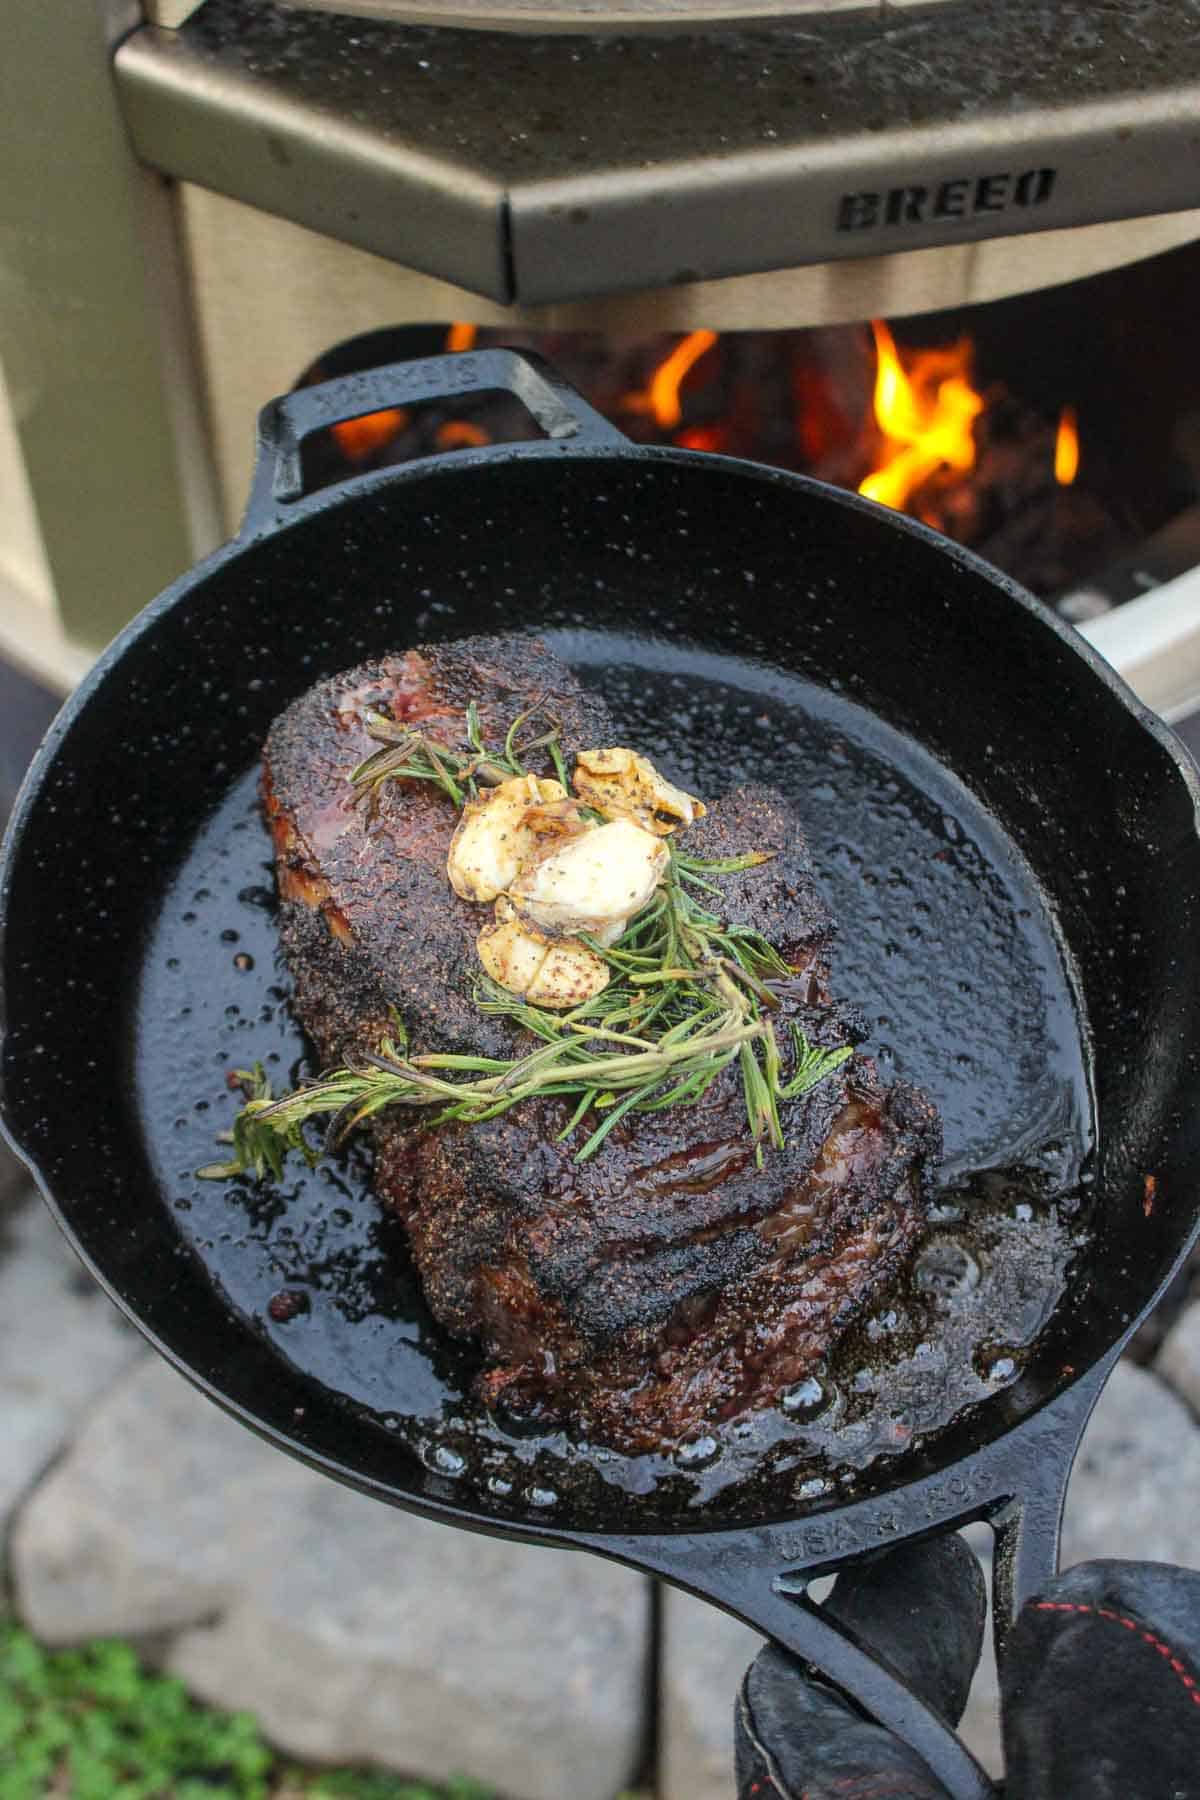 A close up on the steak being pulled from the pizza oven.